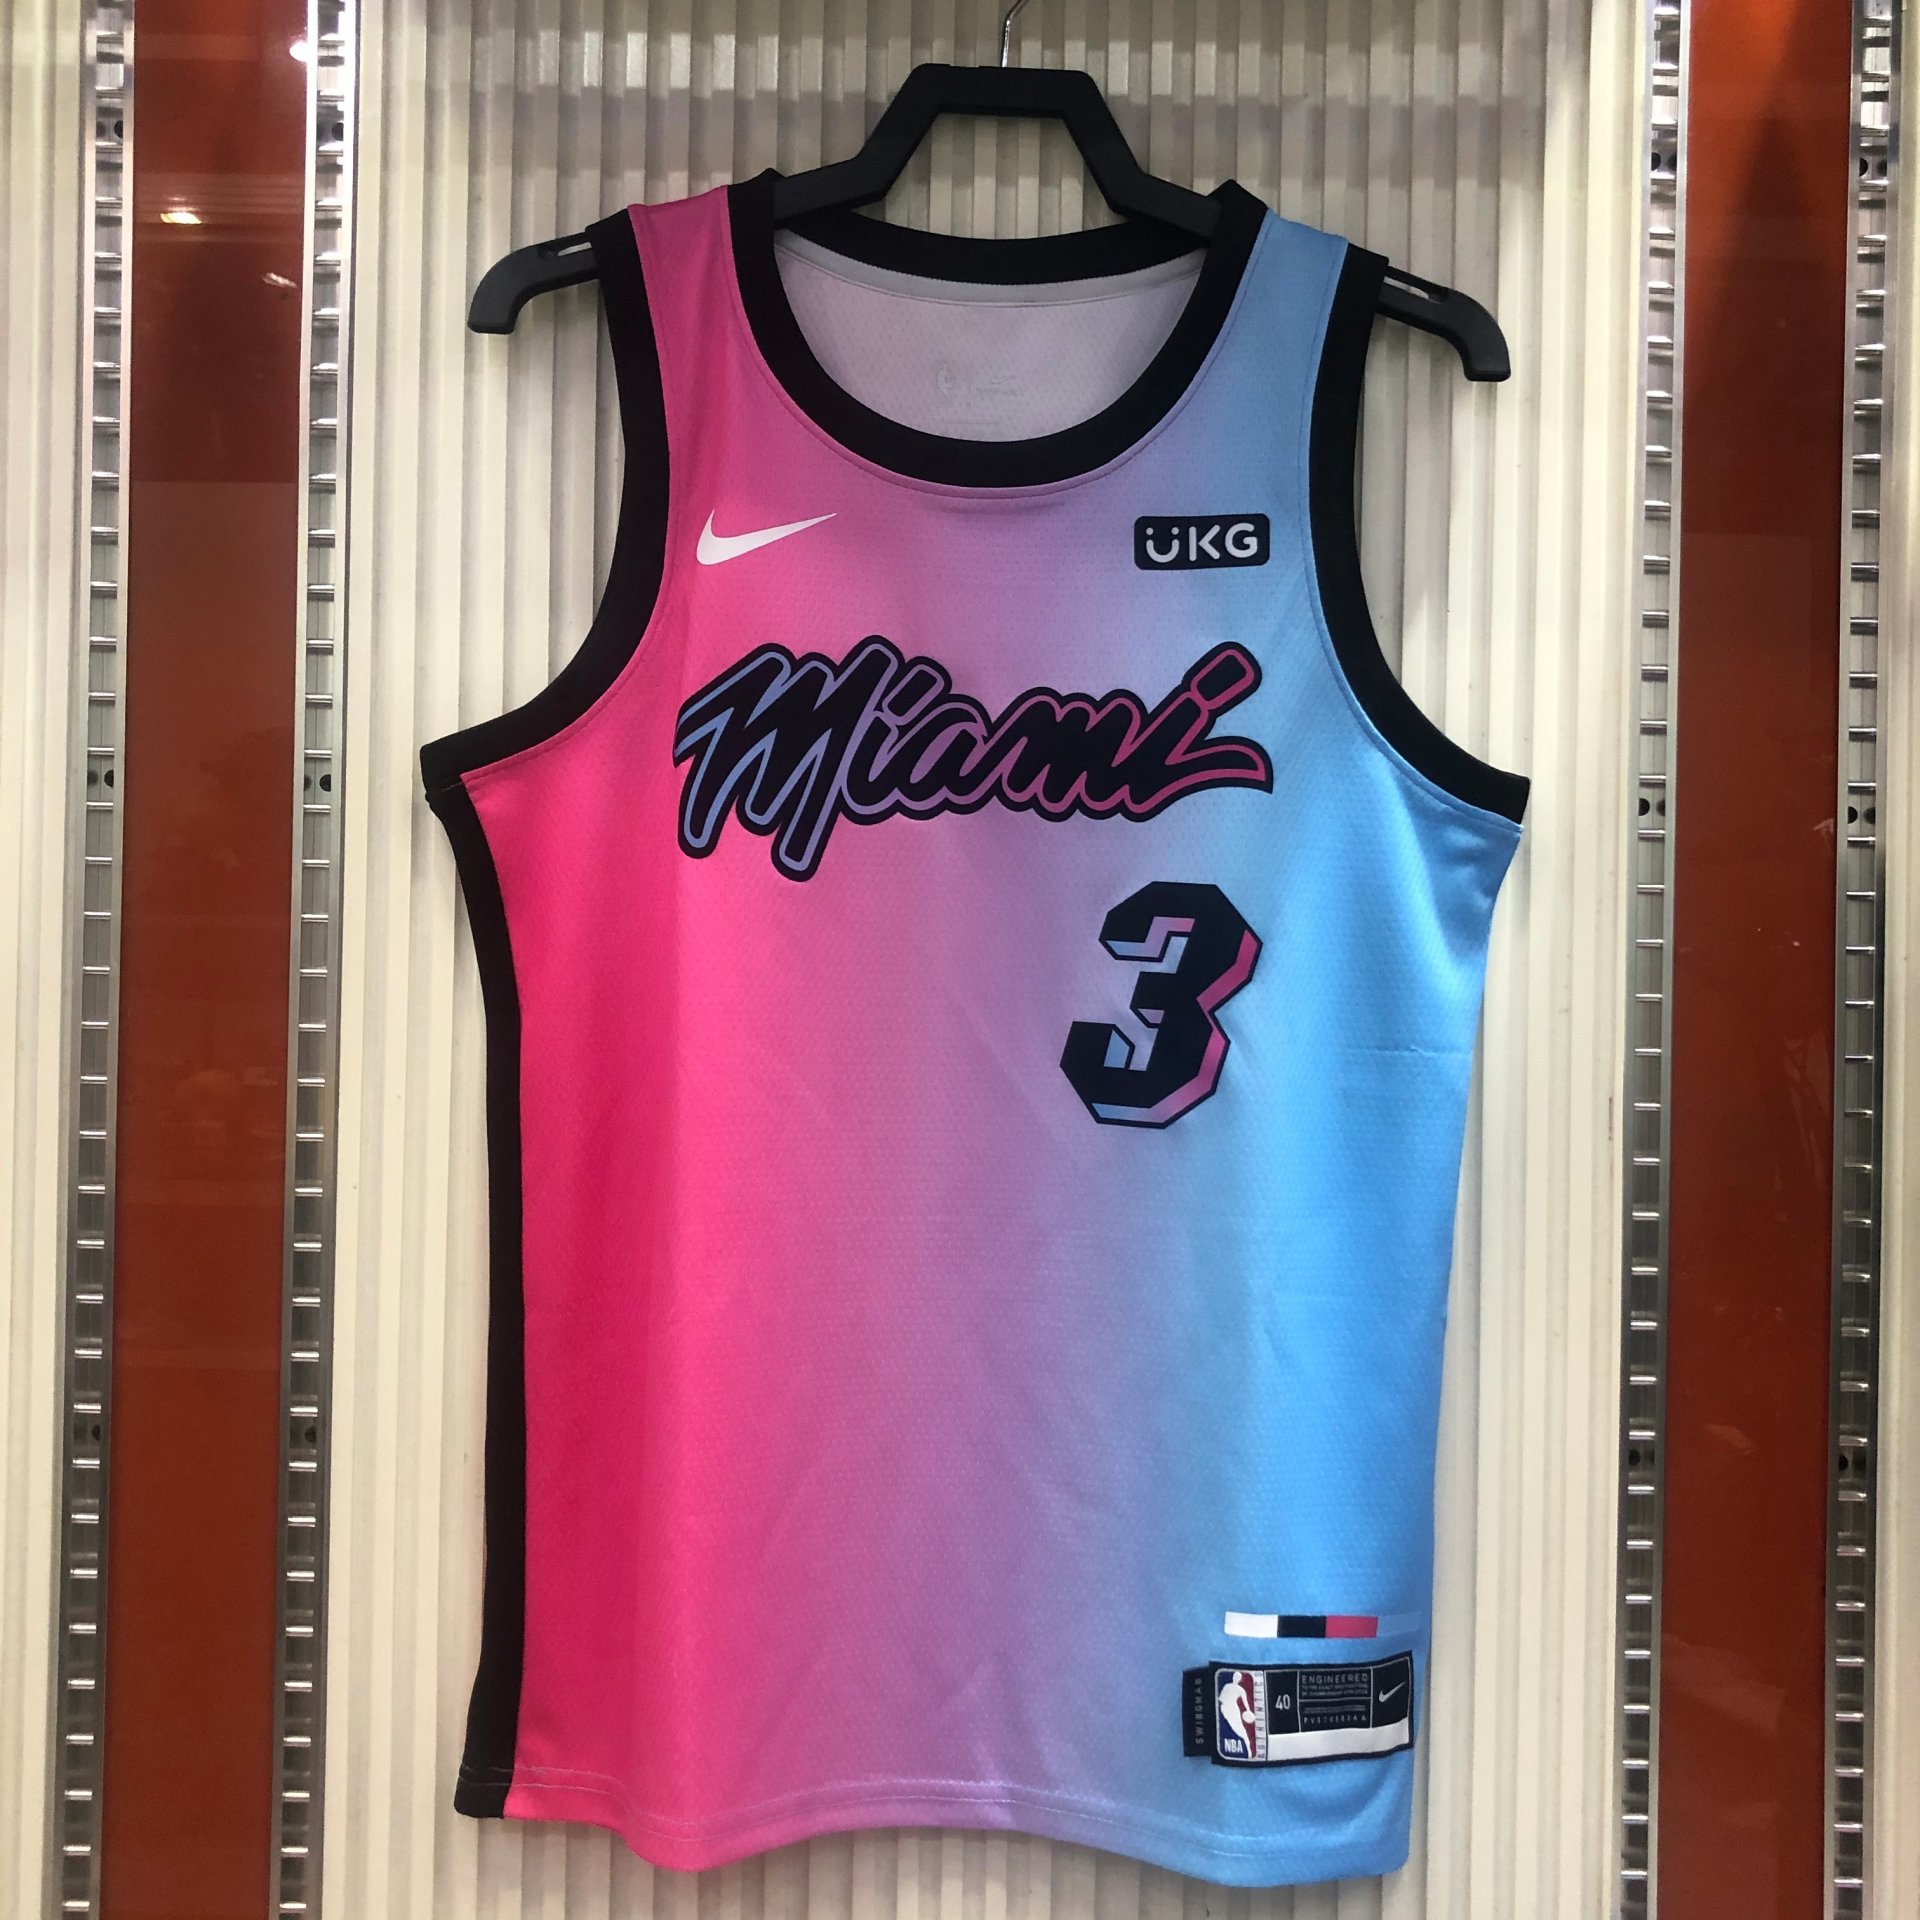 You ready for Dwyane Wade and the Miami Heat? Get this throwback